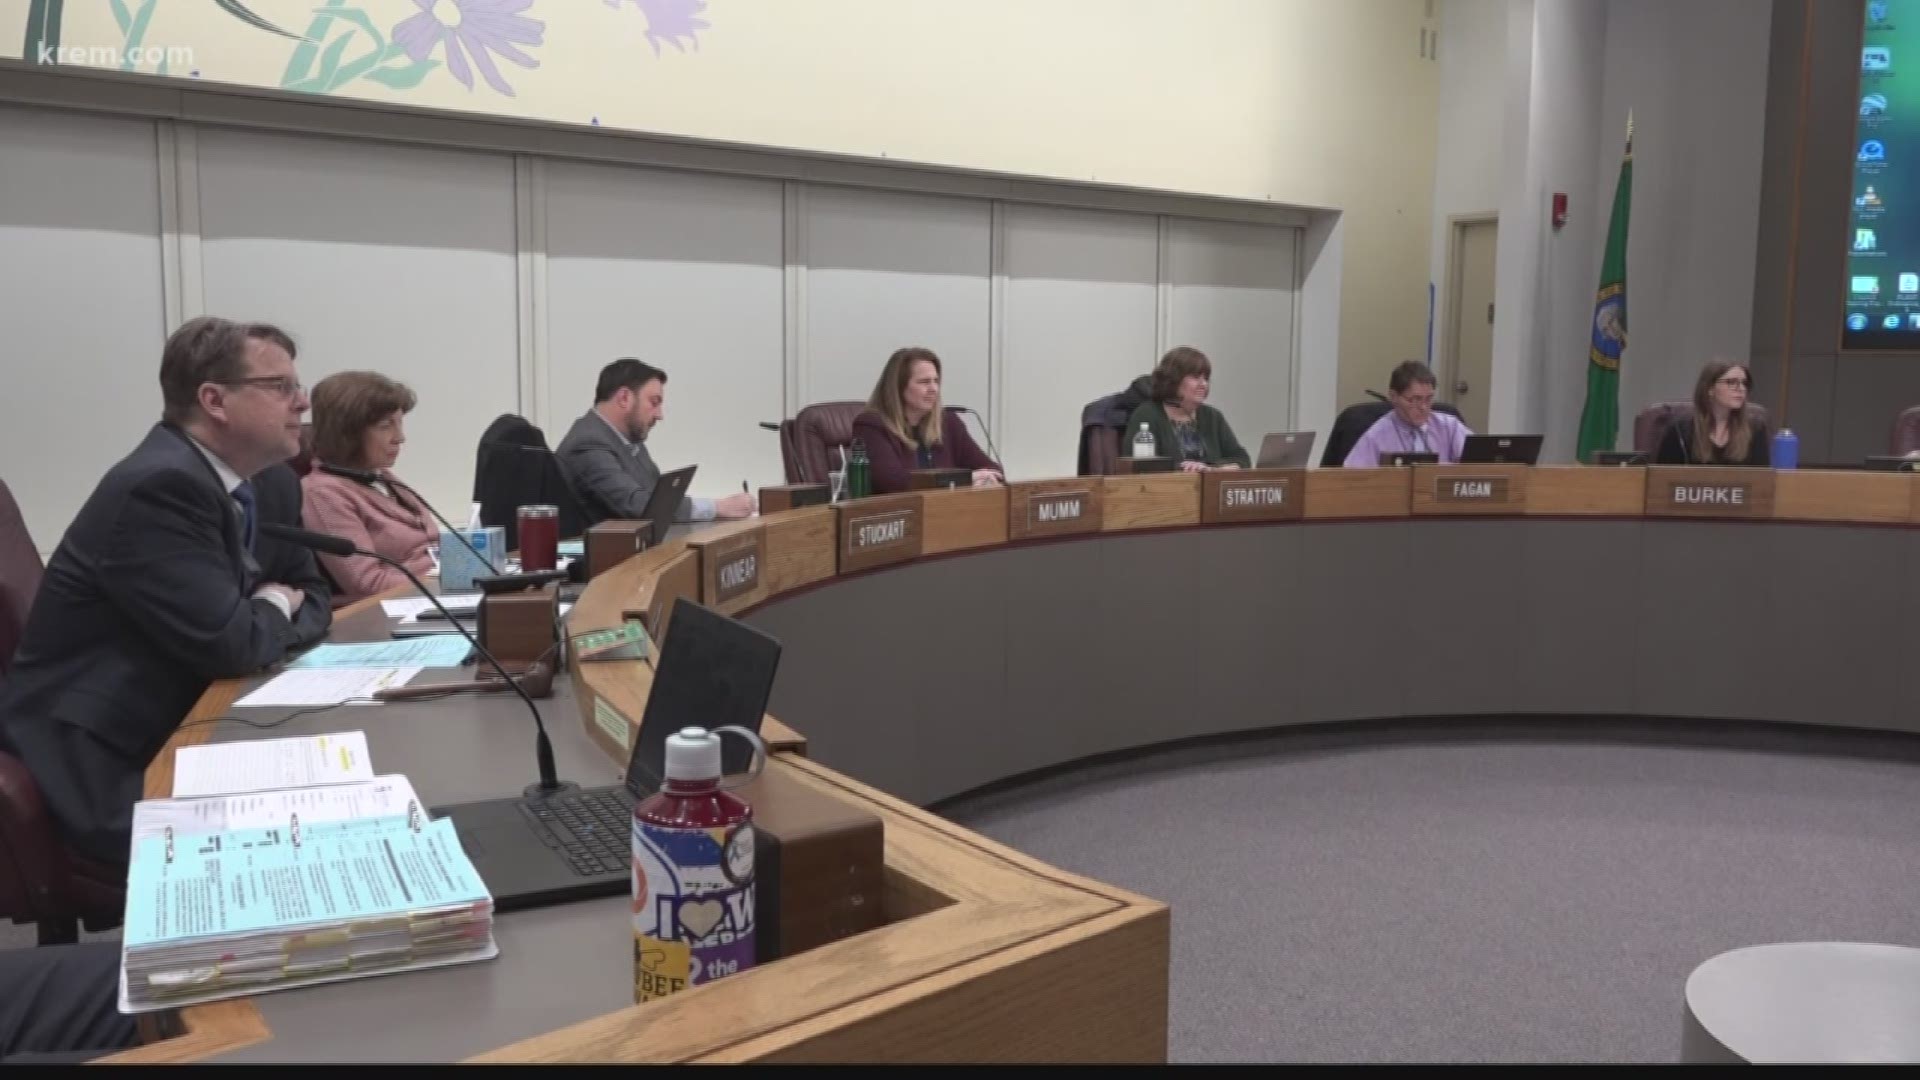 The Spokane City Council argues that they are full-time employees, while Spokane Mayor David Condon is concerned this will lead to full-time salaries.